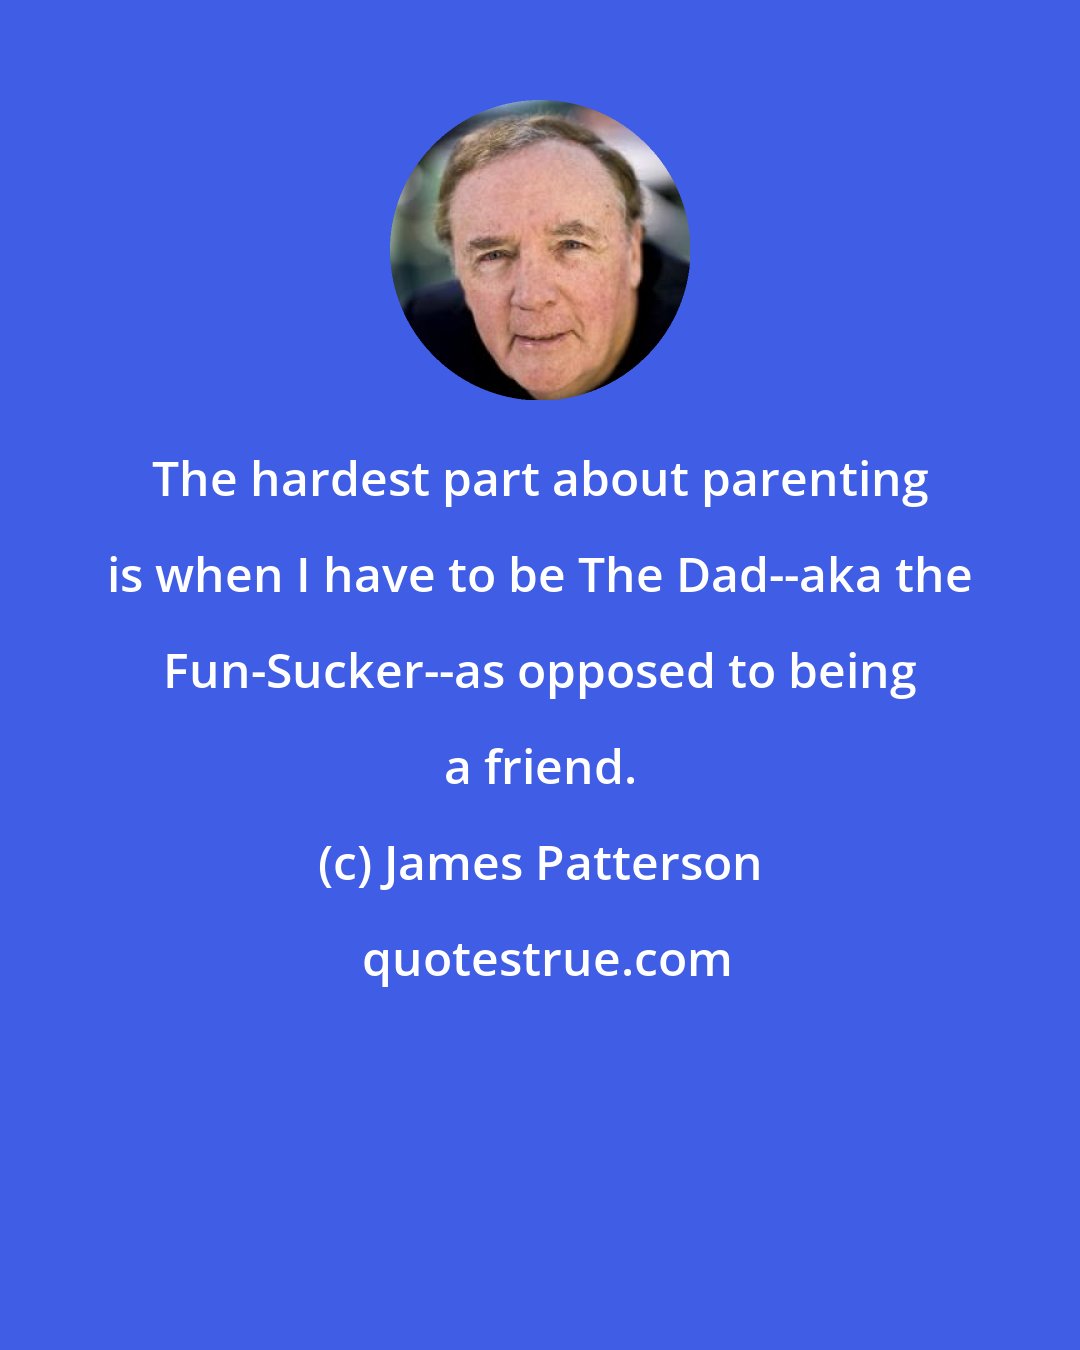 James Patterson: The hardest part about parenting is when I have to be The Dad--aka the Fun-Sucker--as opposed to being a friend.